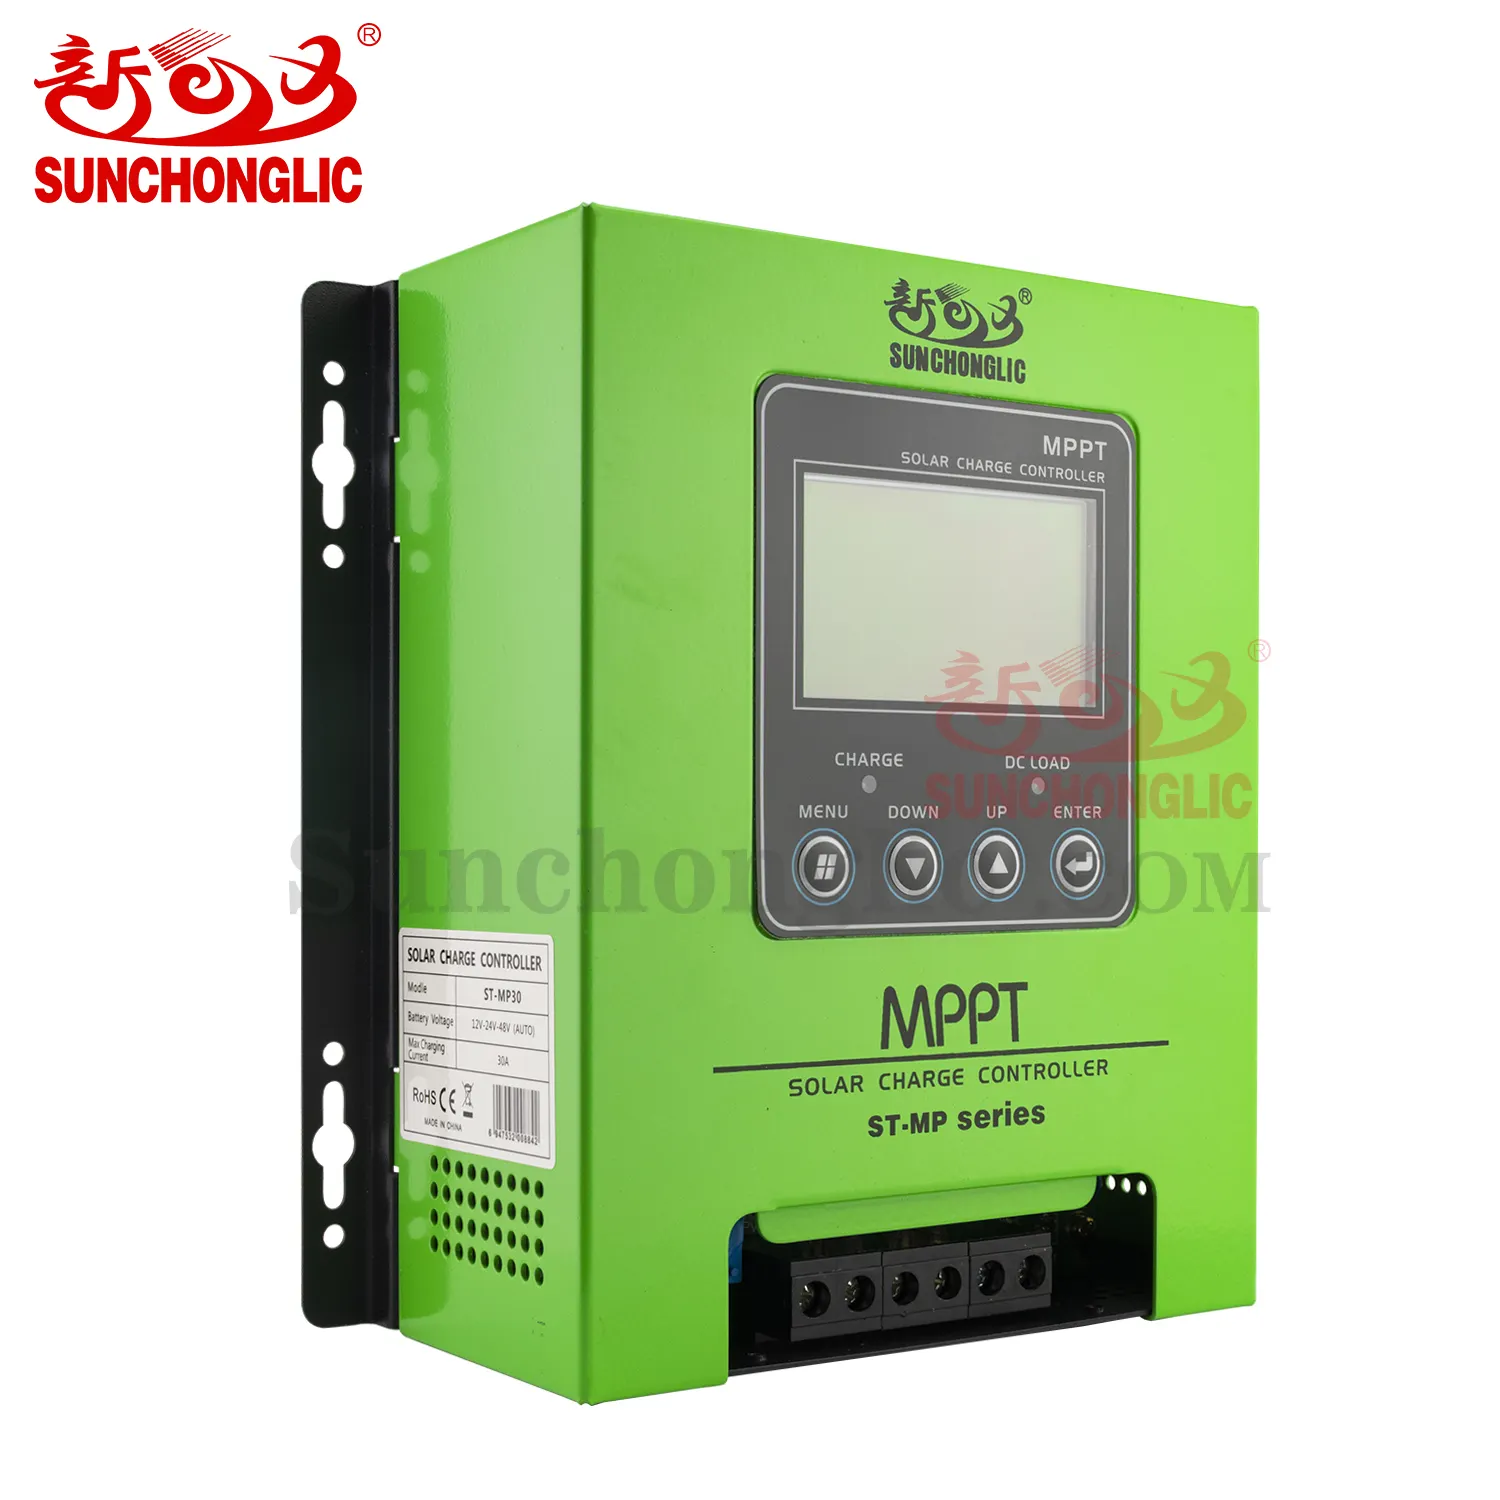 Solar Charge Controller 12v Wholesales Sunchonglic MPPT 12V/24V/48V 30A Solar Panel Solar Charge Controller For Solar System